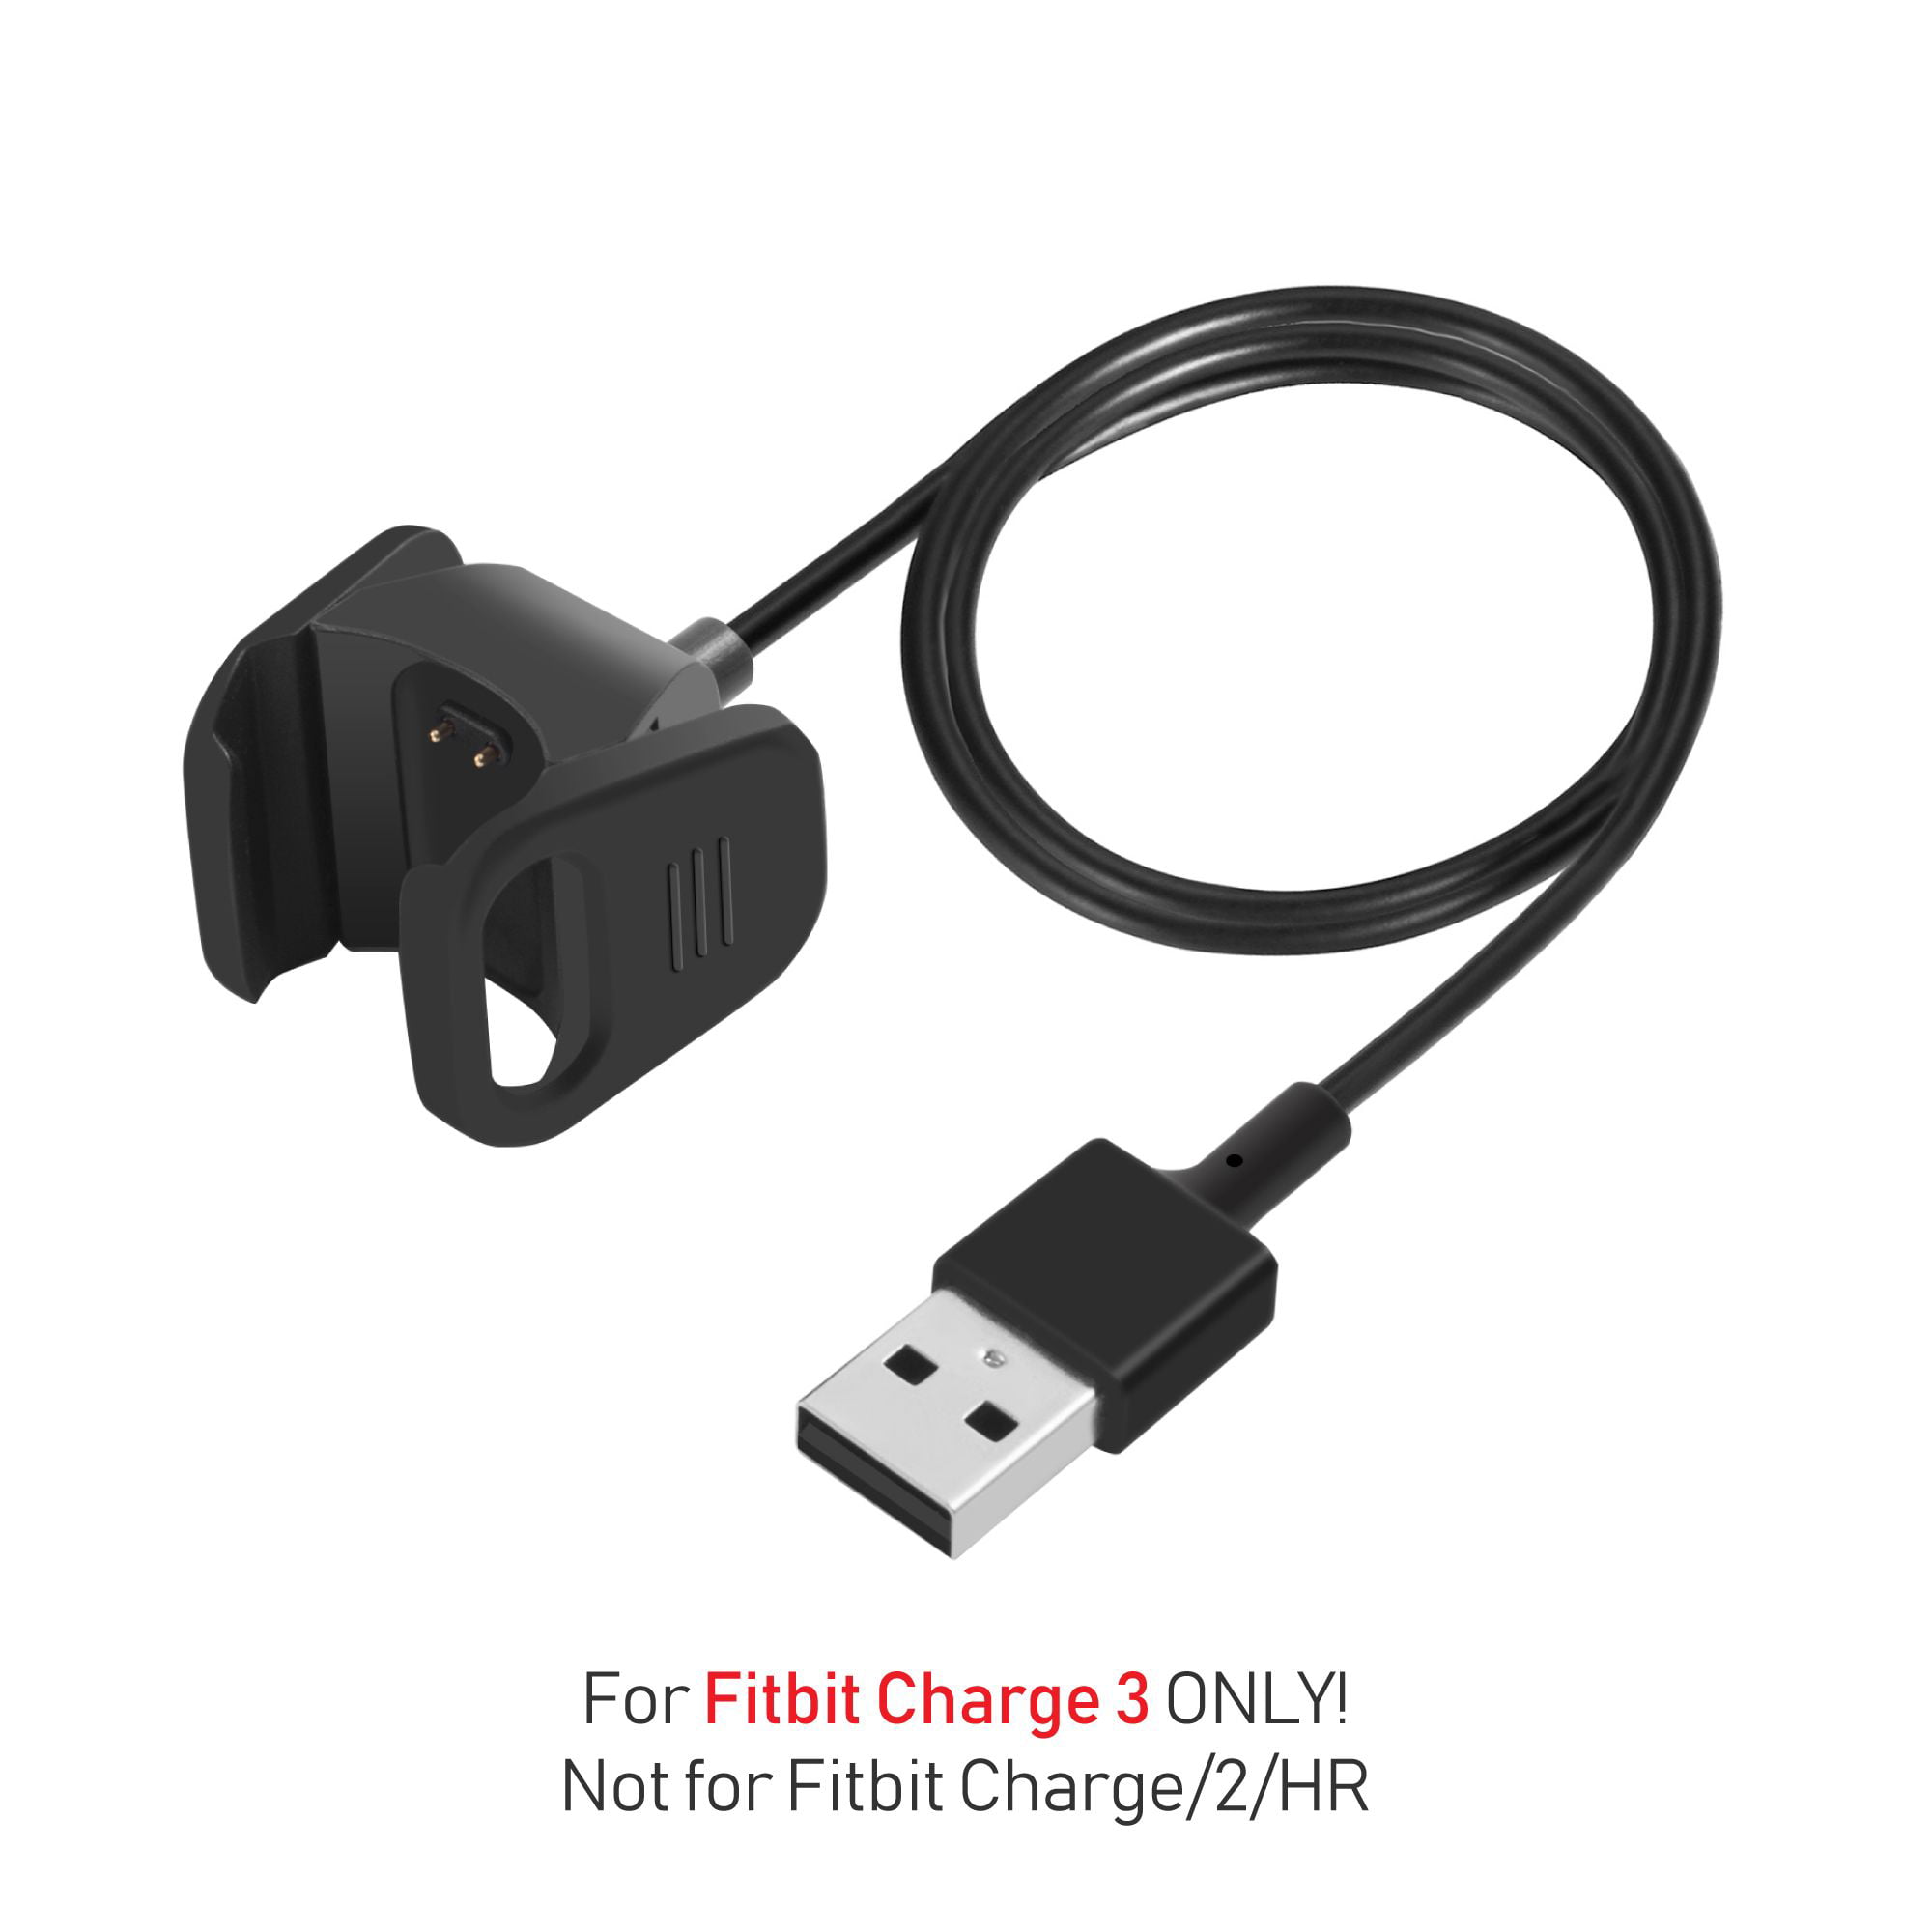 USB CHARGER for Fitbit One Activity Sleep Tracker Charger ONLY 